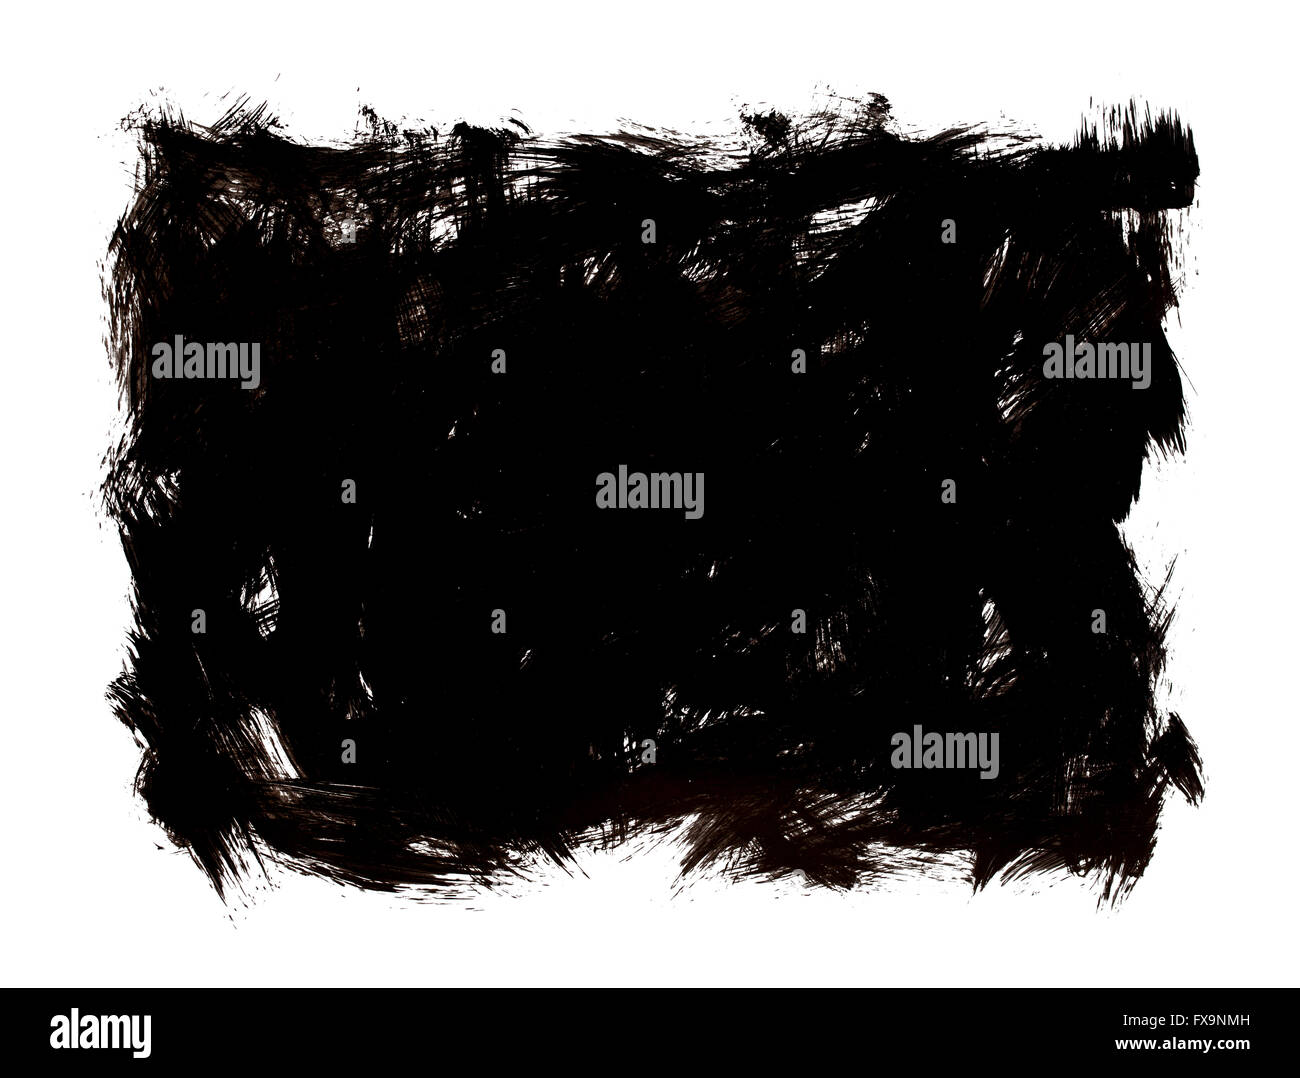 Black Painted Brush Strokes Patch Isolated on White Background. Stock Photo